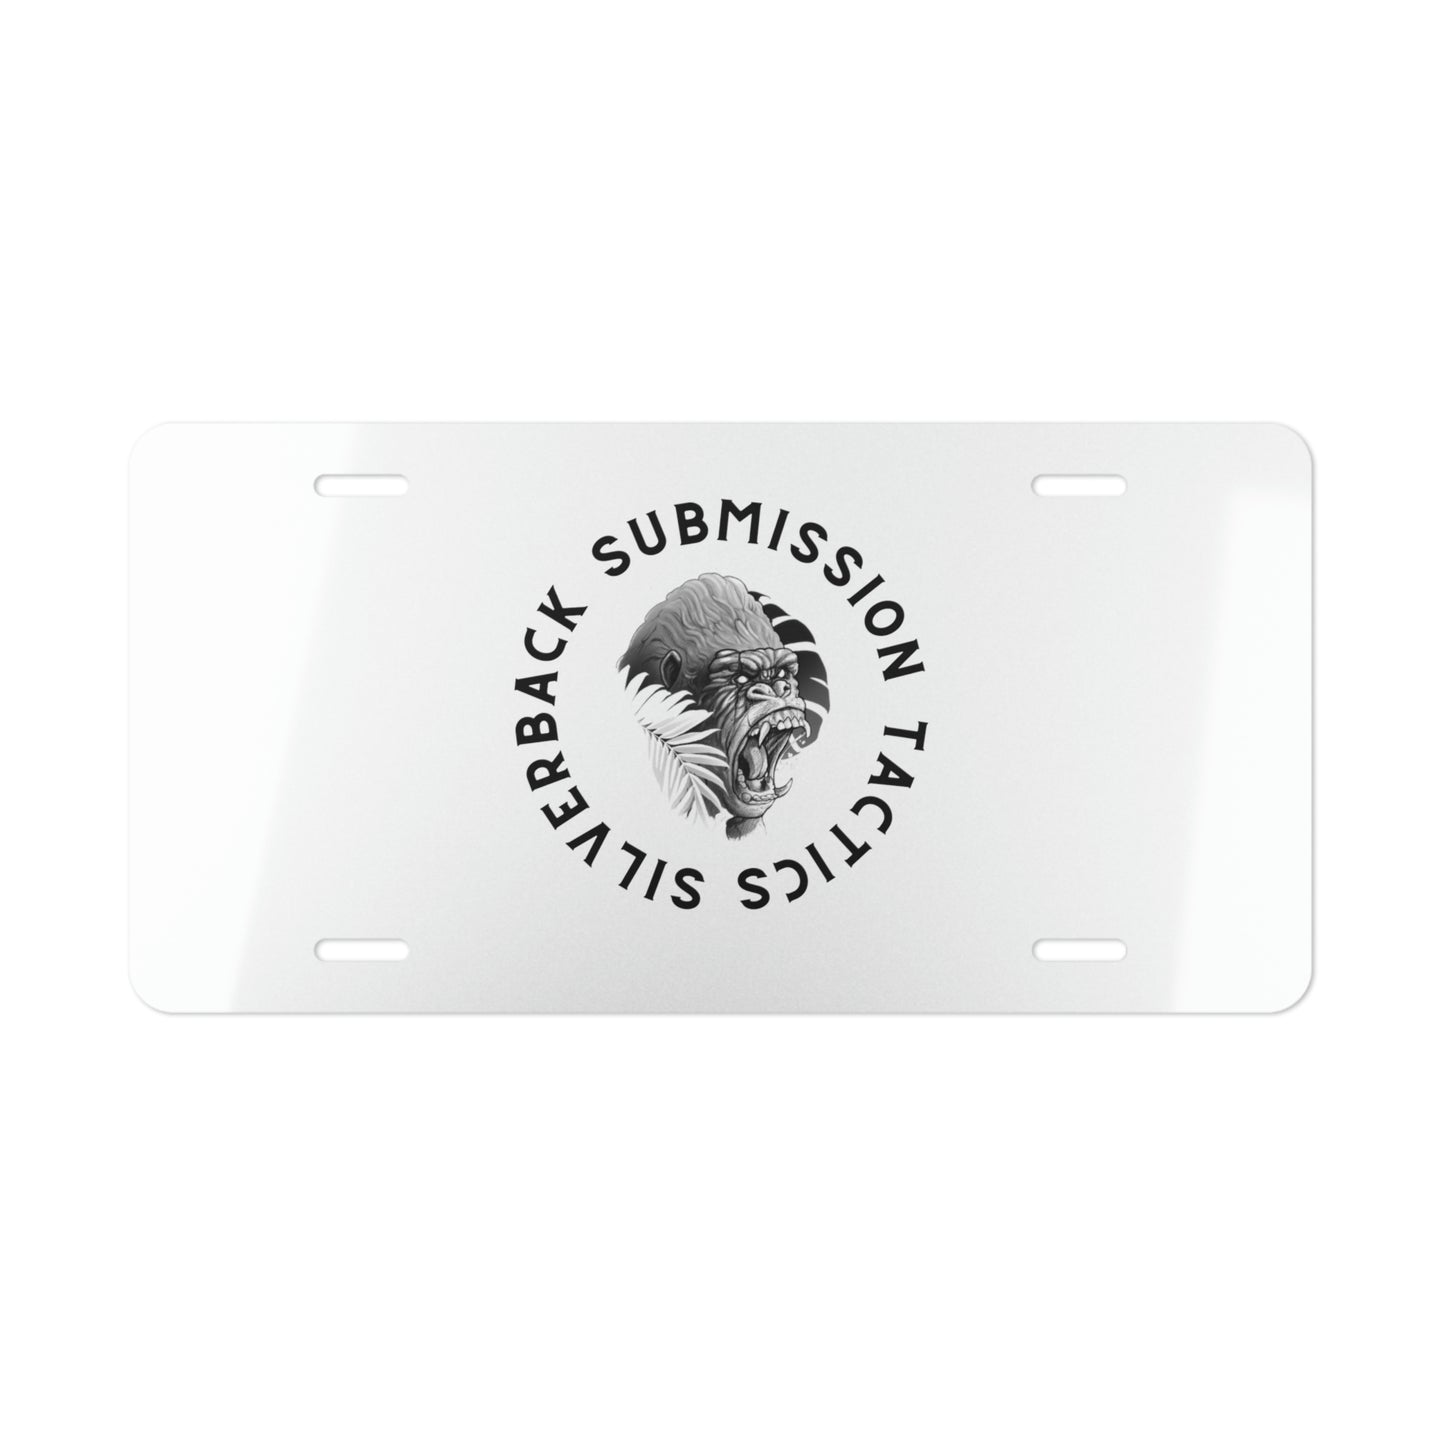 Silverback Submission Tactics Vanity Plate (White)